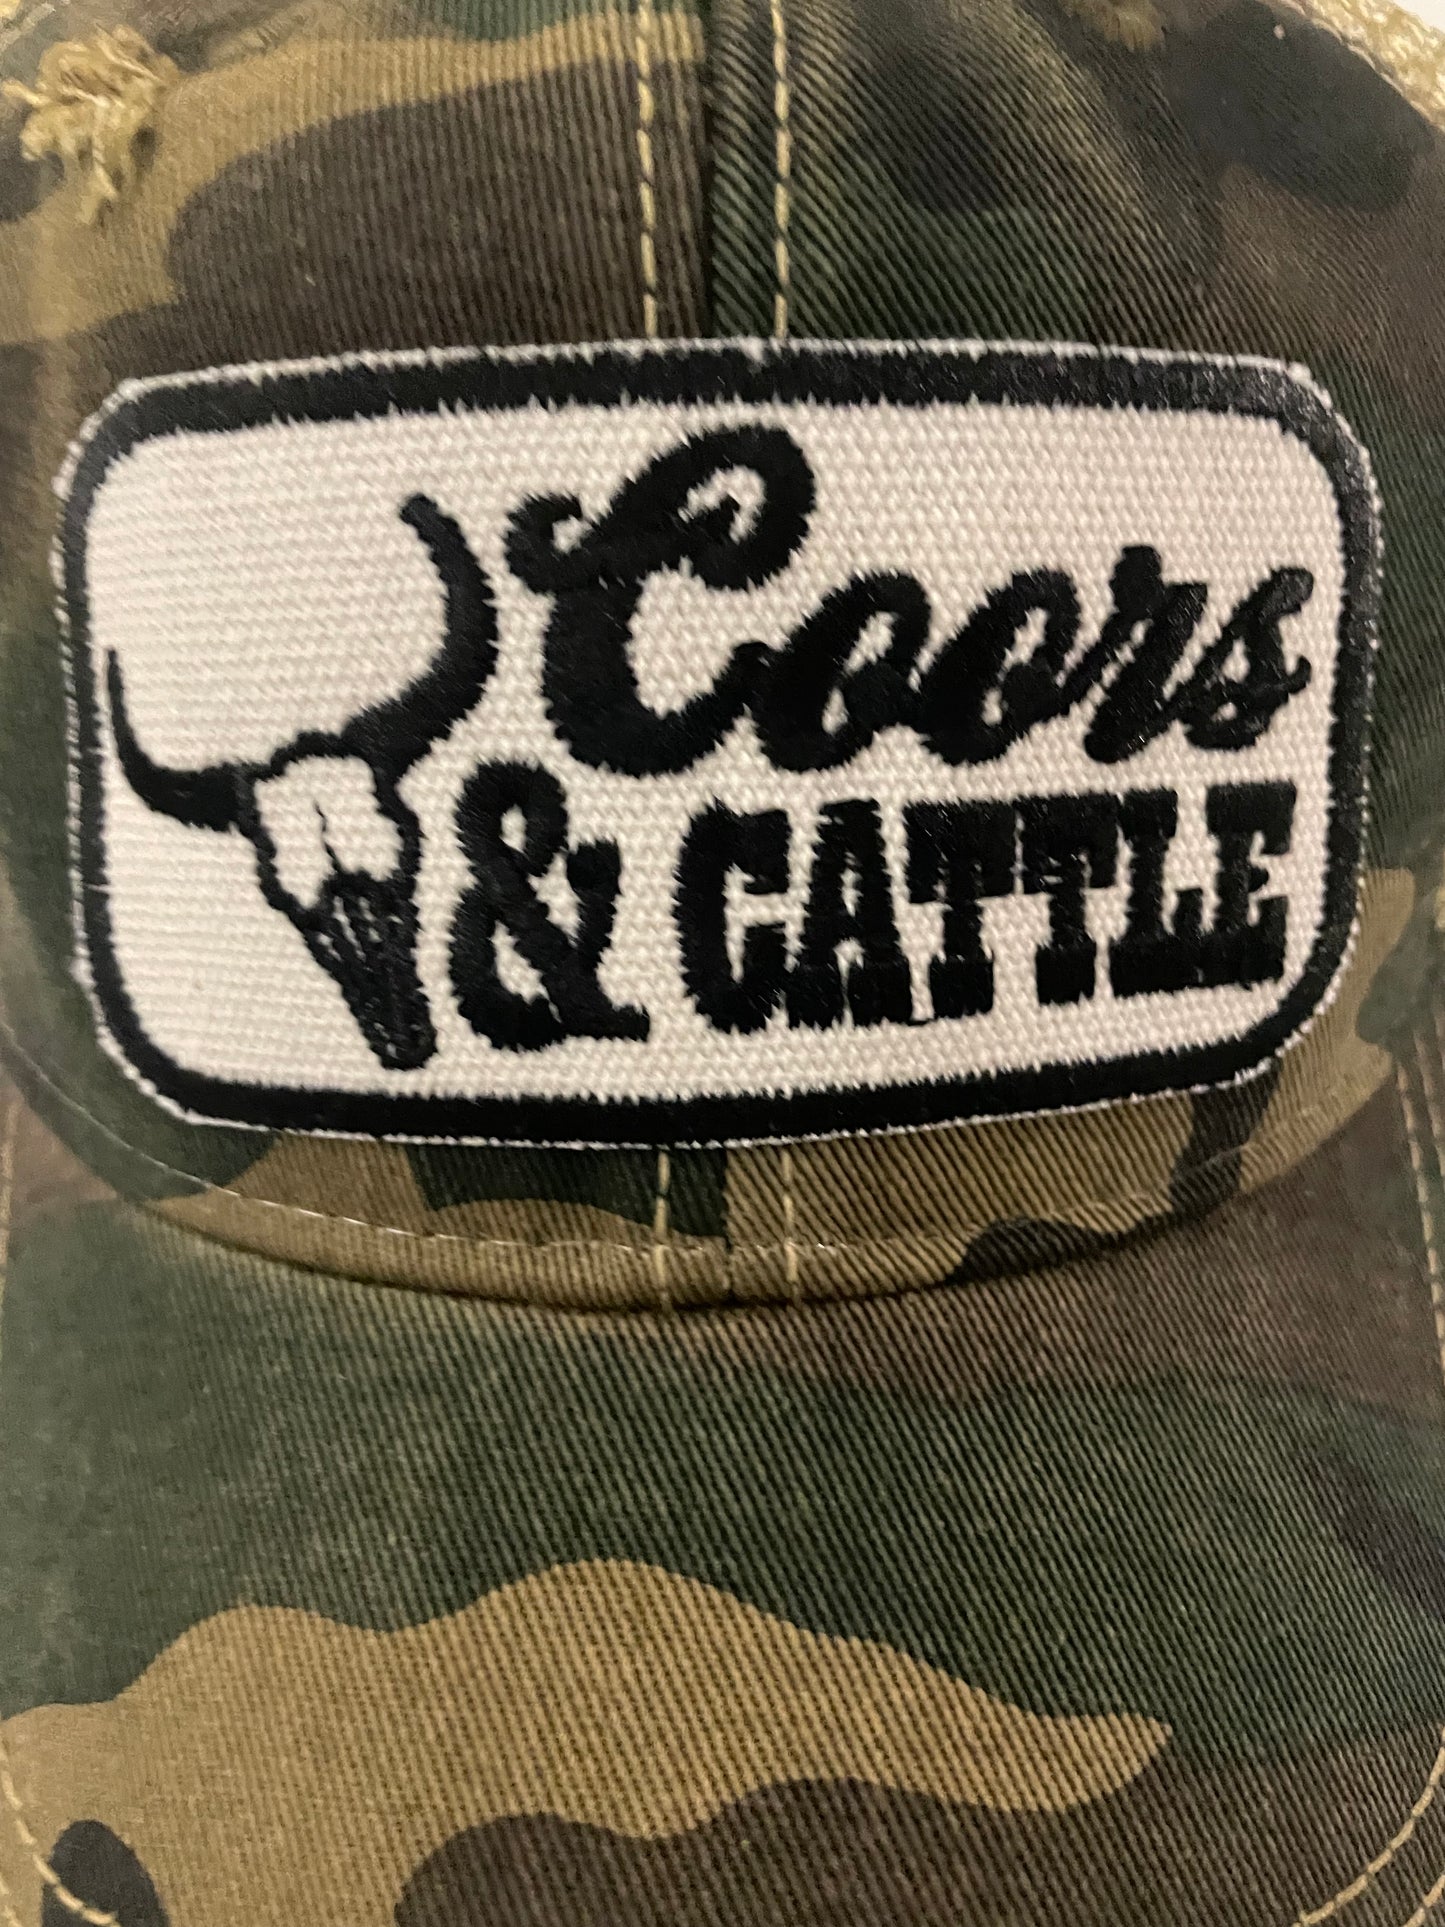 Coors & Cattle Distressed Hat